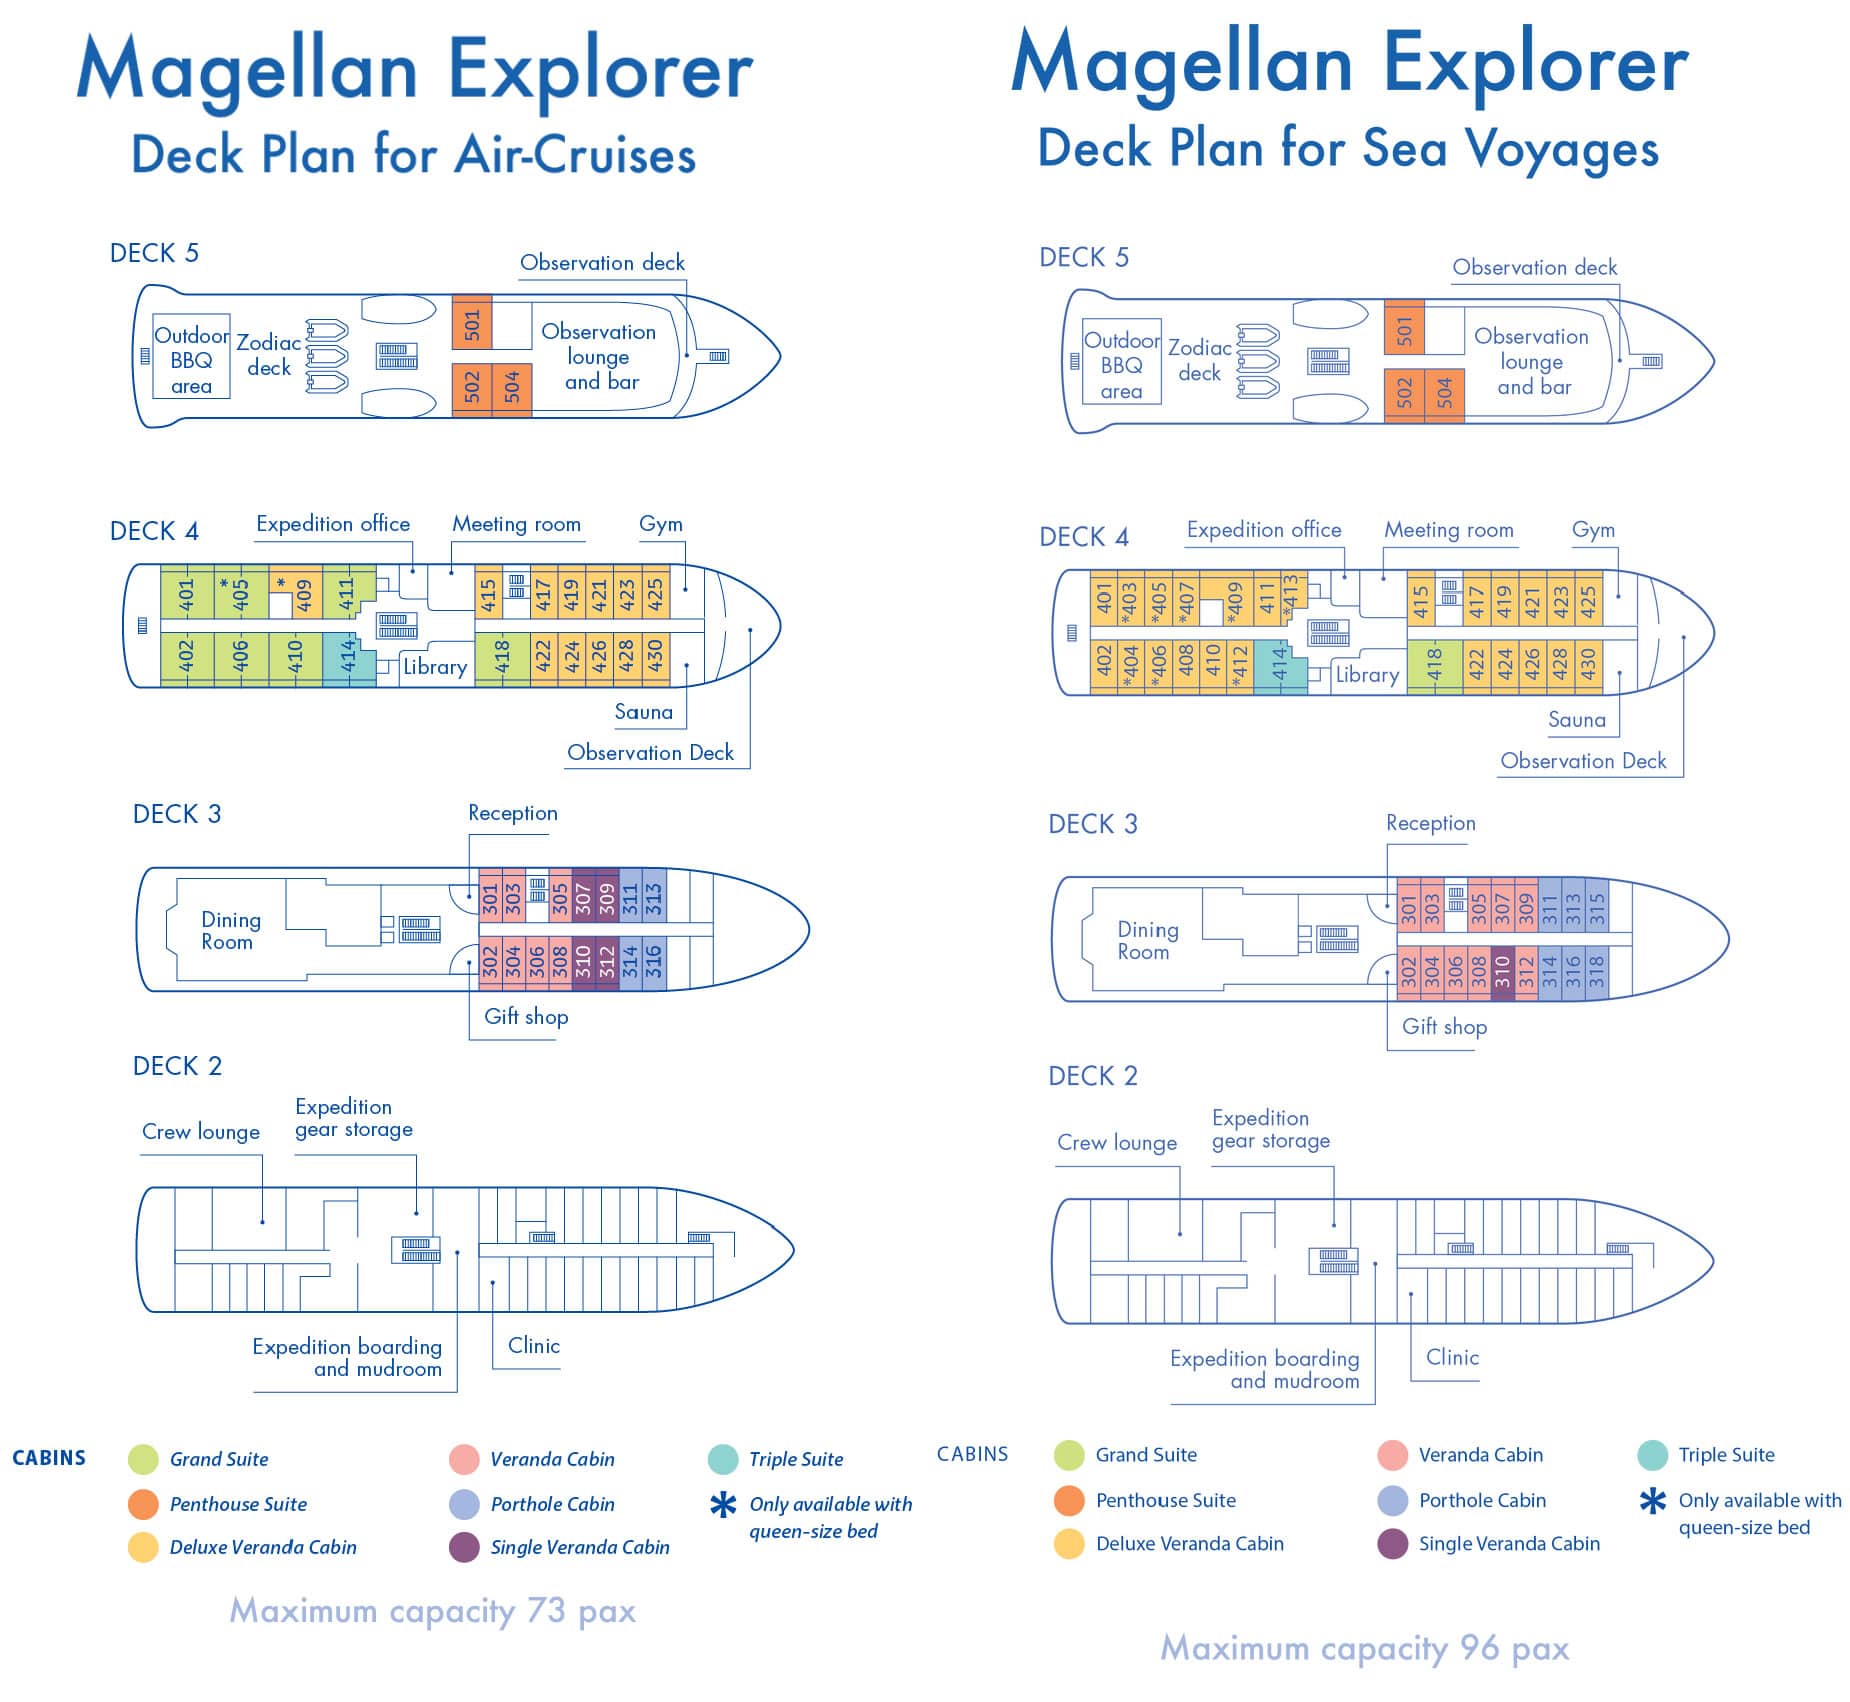 Two deck plans for polar ship Magellan Explorer, showing capacity for 73 or 96 guests across 3 decks.